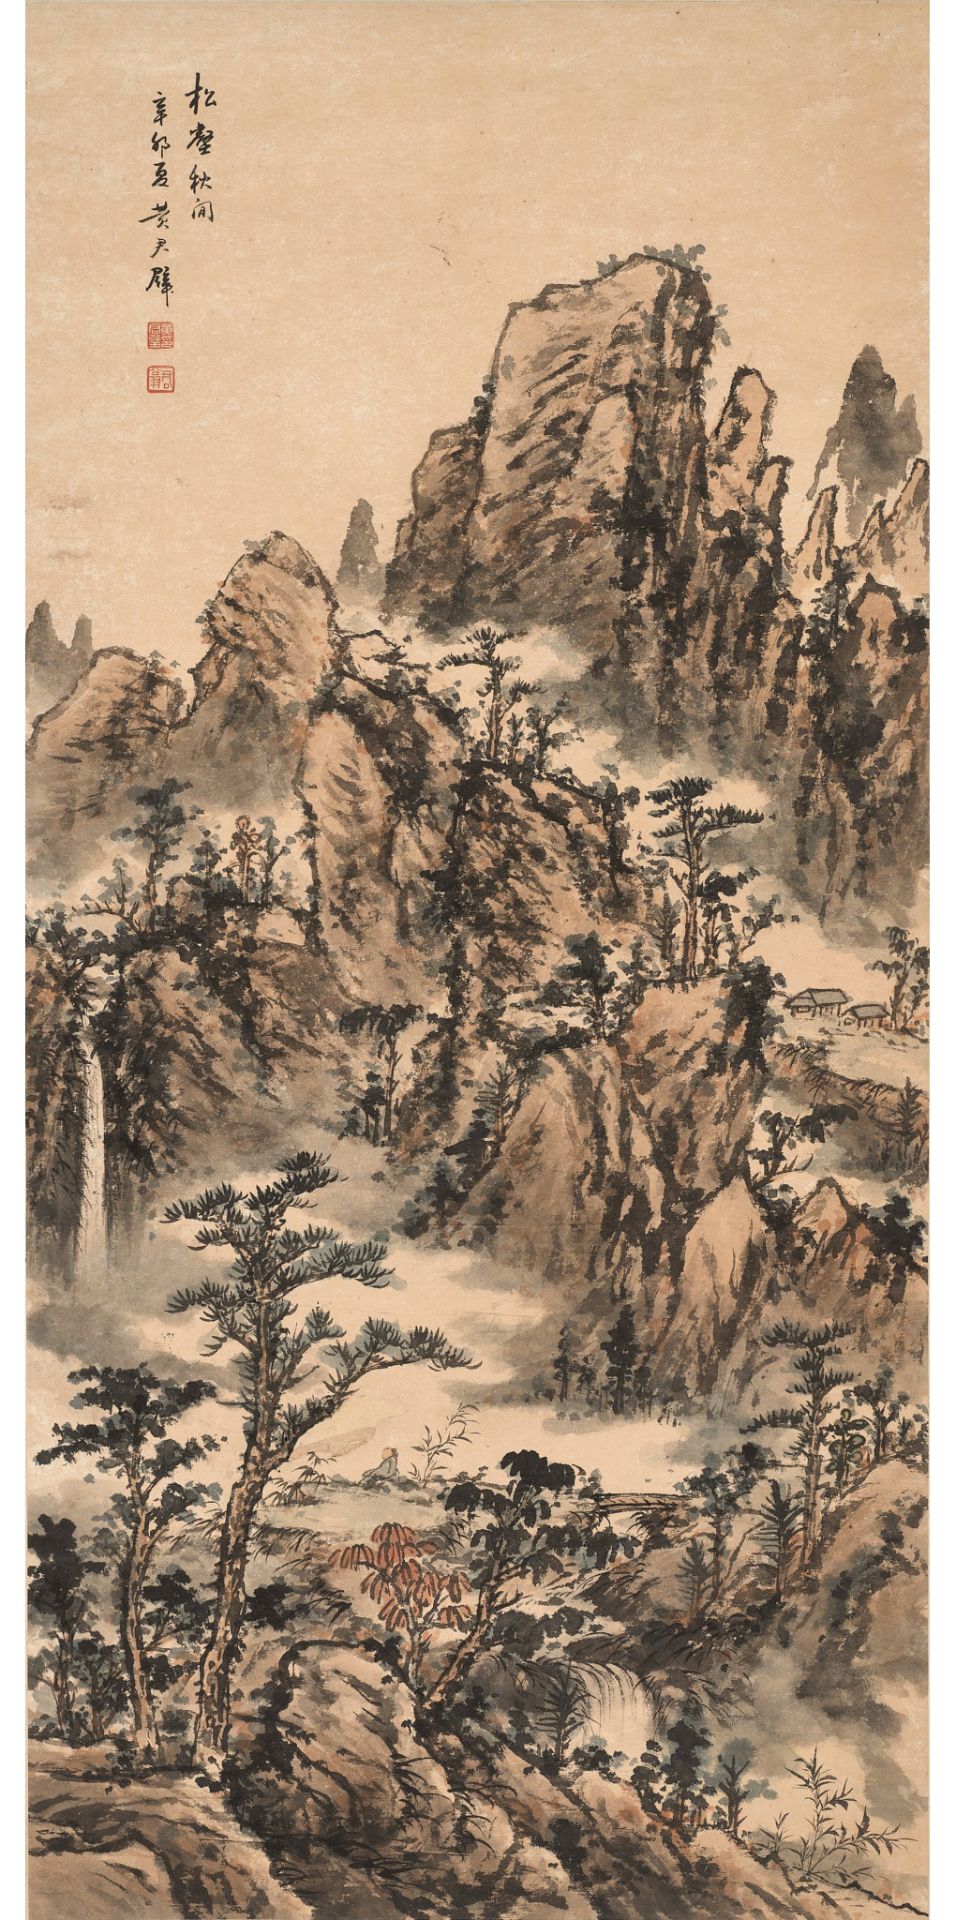 AUTUMN MOUNTAIN LANDSCAPE', BY HUANG JUNBI (1898-1991), CHINA, DATED 1951